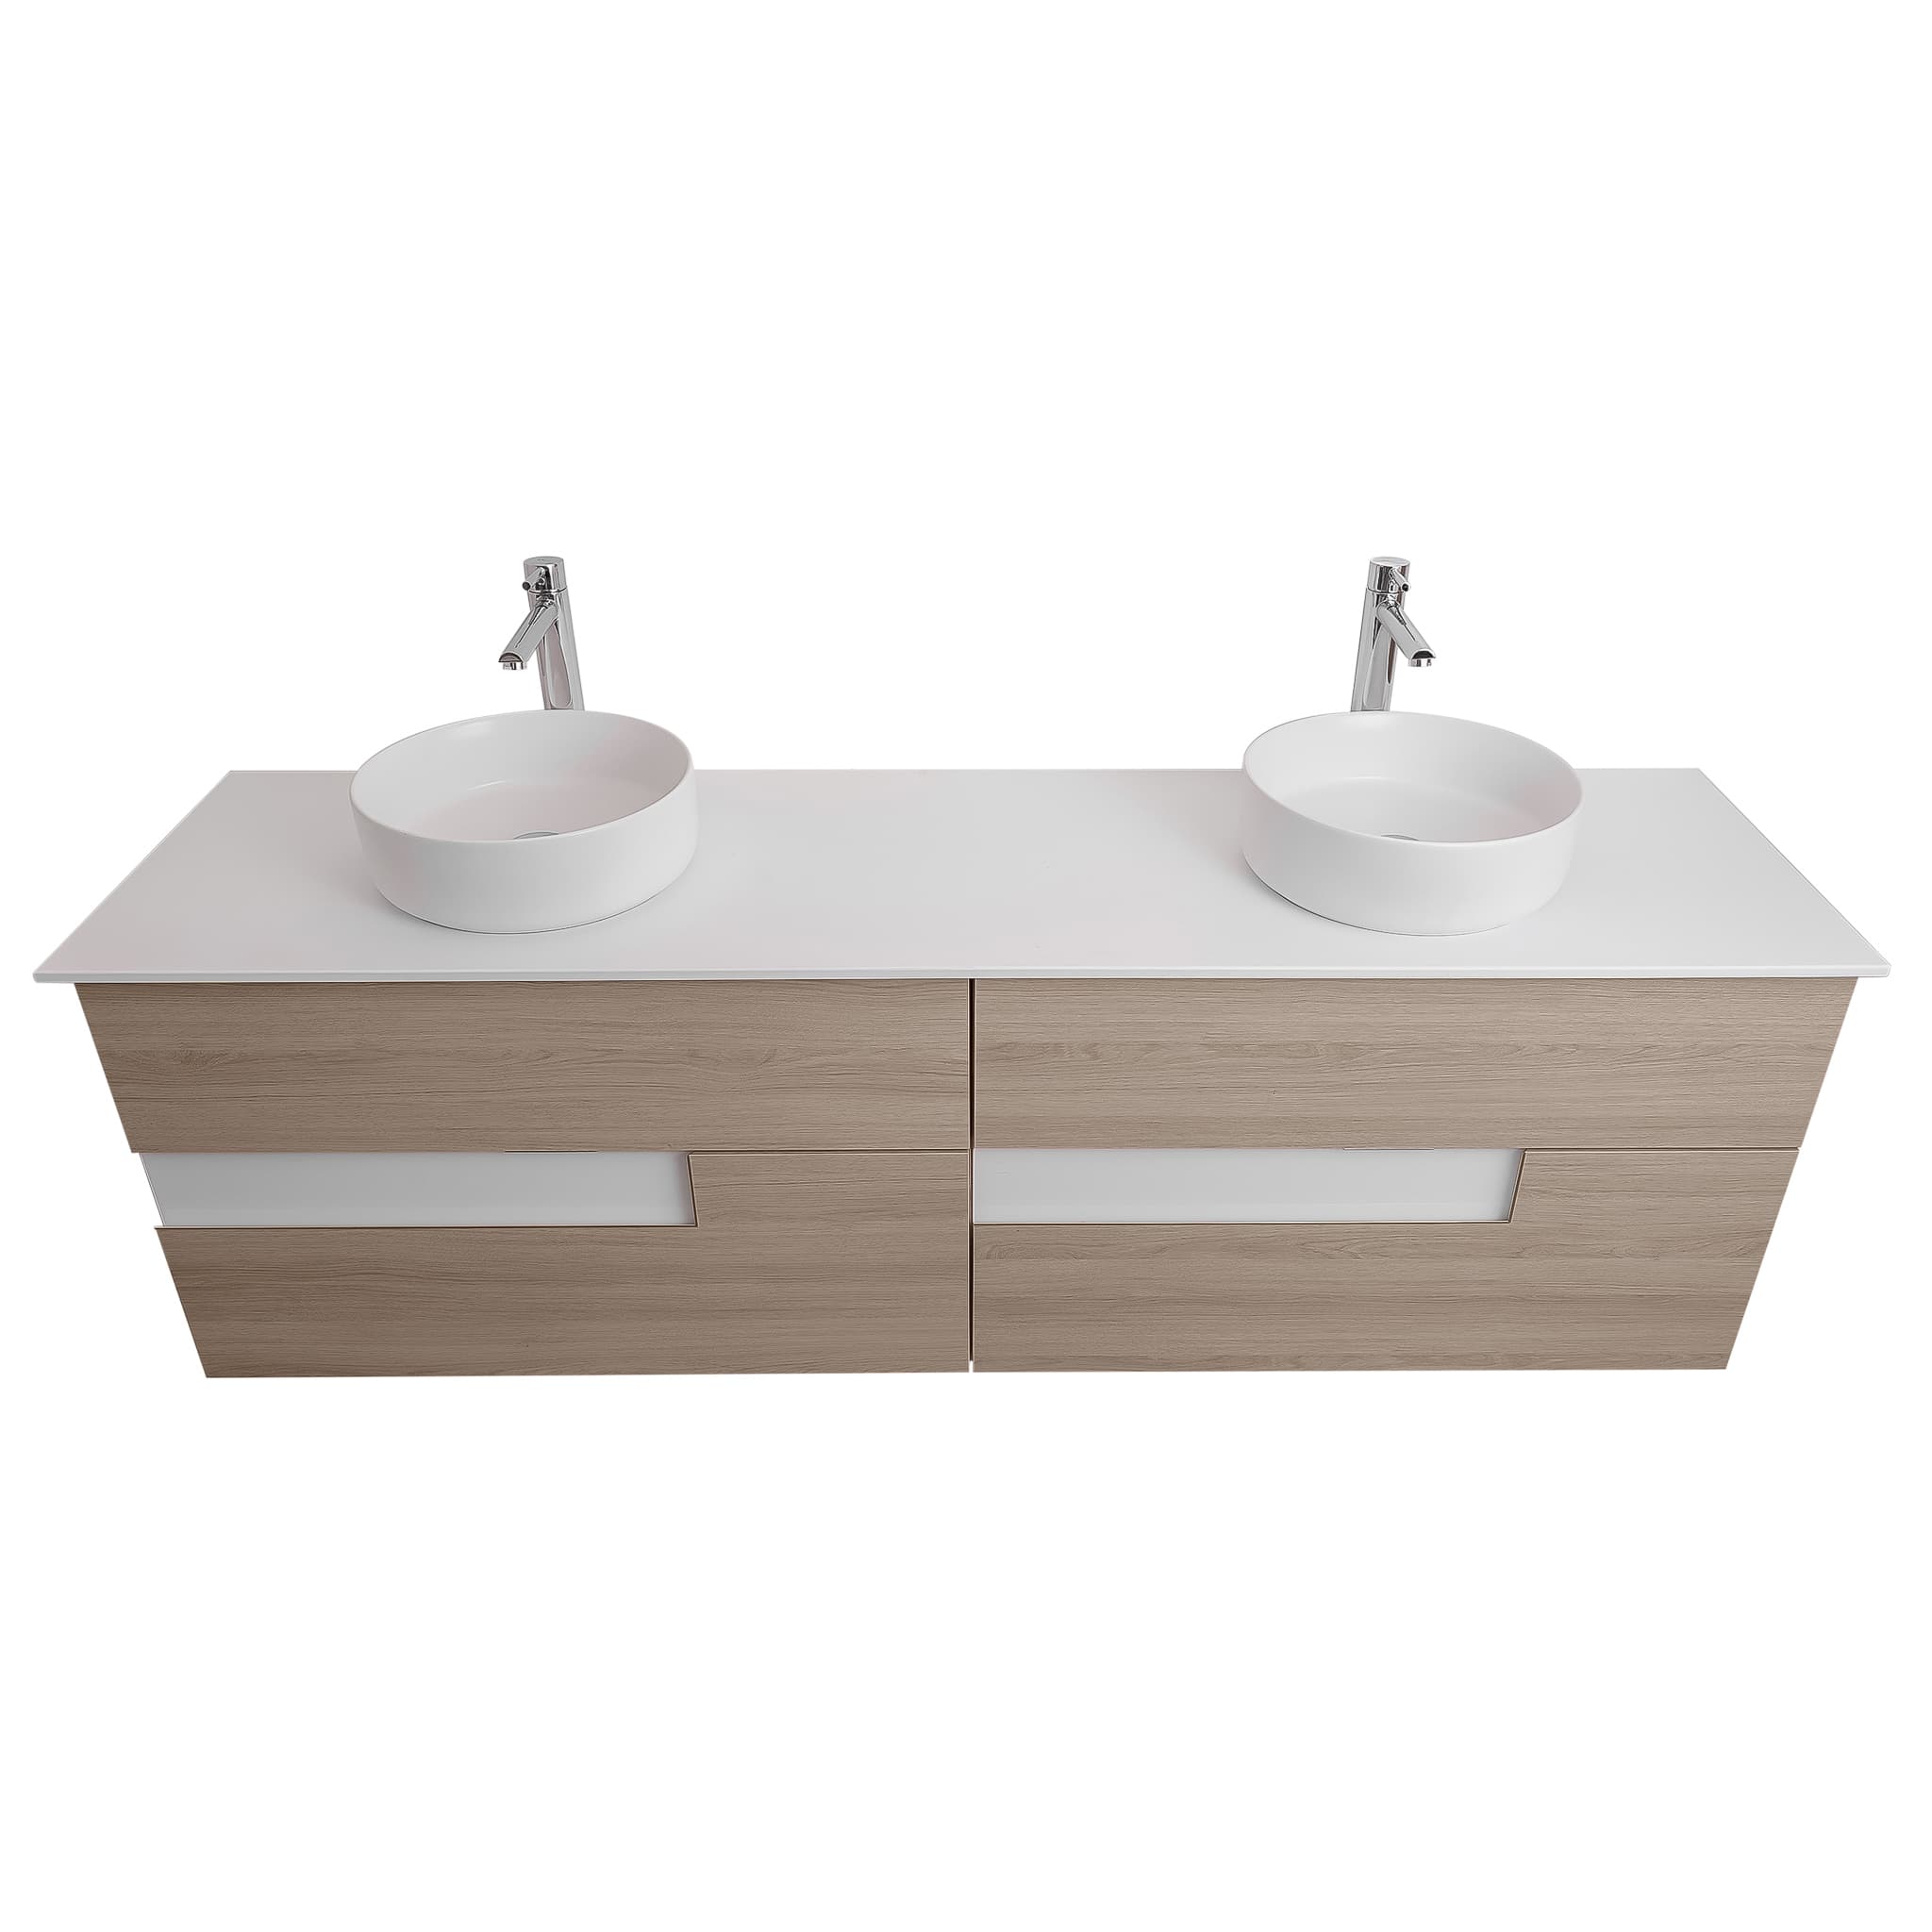 Vision 72 Natural Light Wood Cabinet, Ares White Top And Two Ares White Ceramic Basin, Wall Mounted Modern Vanity Set